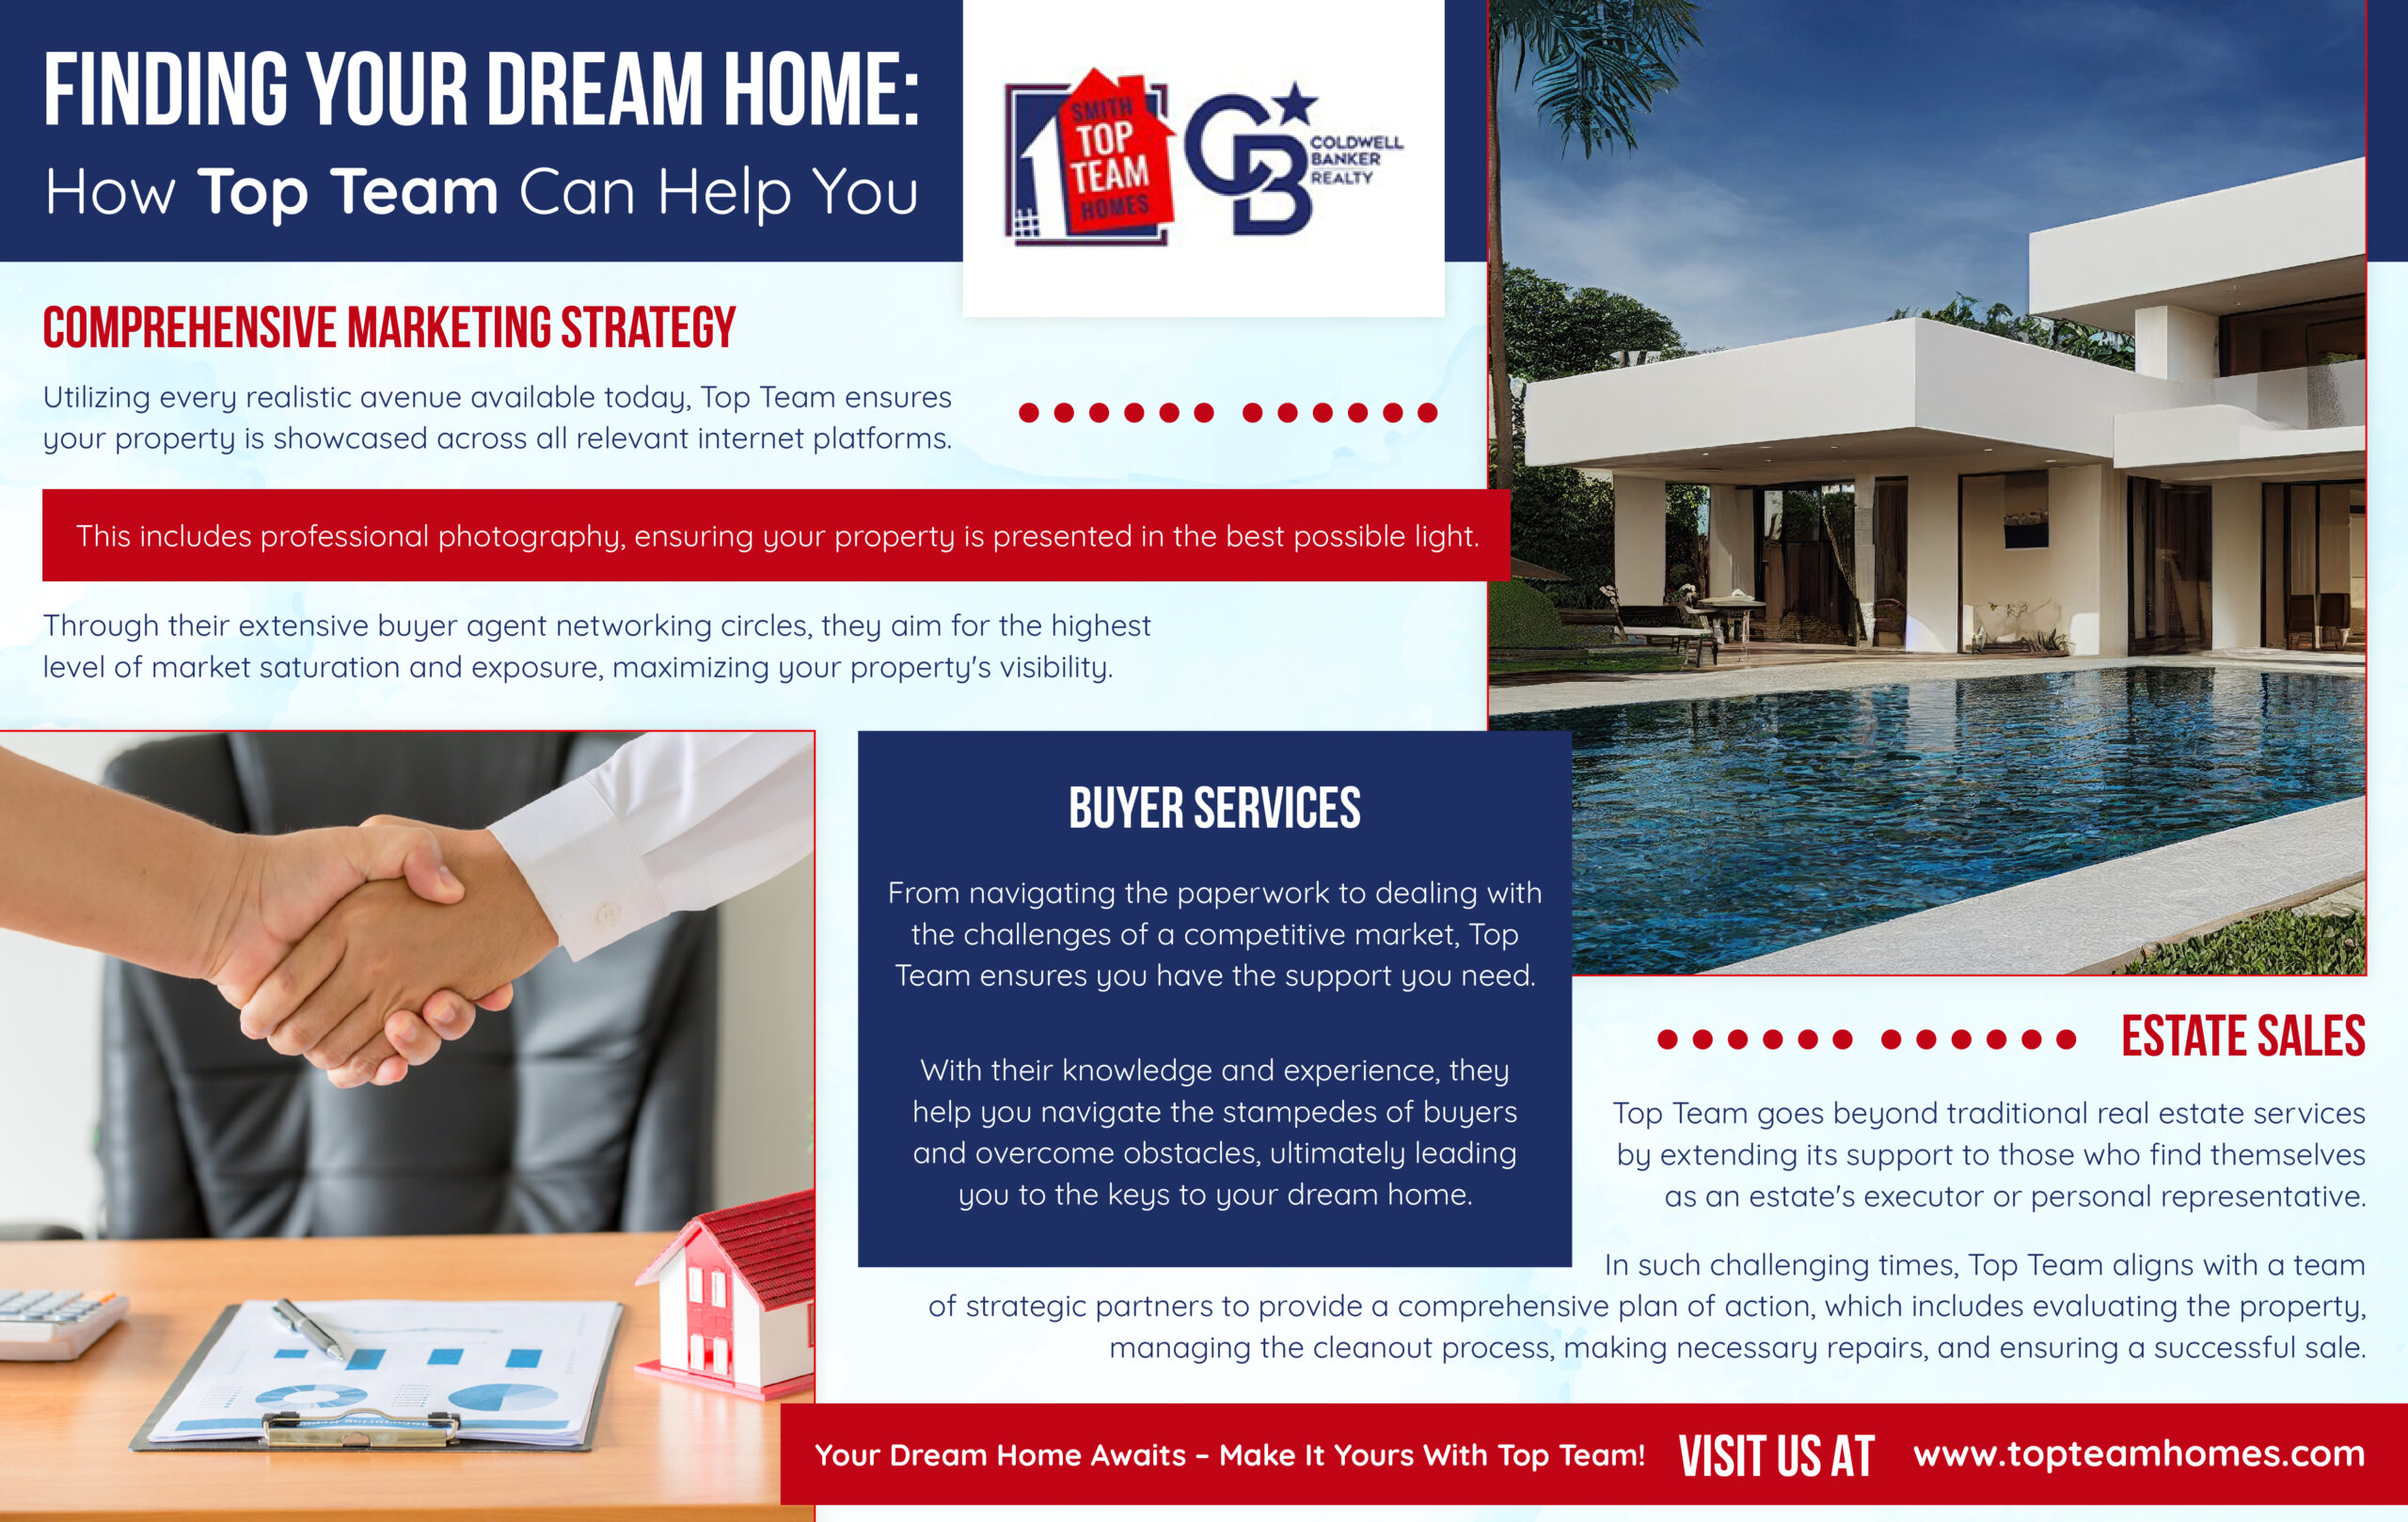 Finding Your Dream Home: How Top Team Can Help You